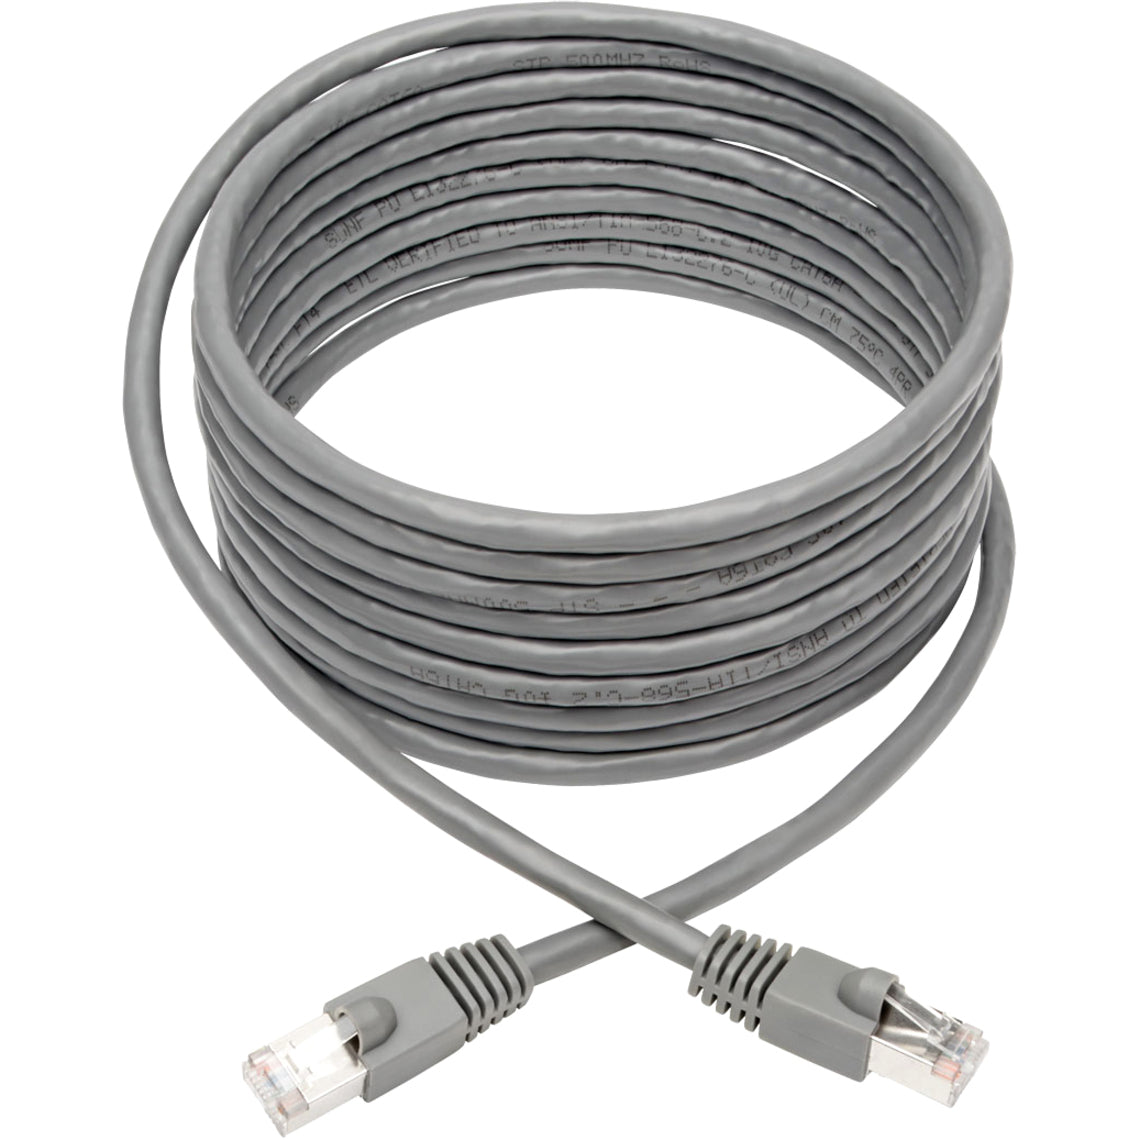 Tripp Lite N262-014-GY Cat.6a STP Patch Network Cable, 10G, 14 ft, Gray